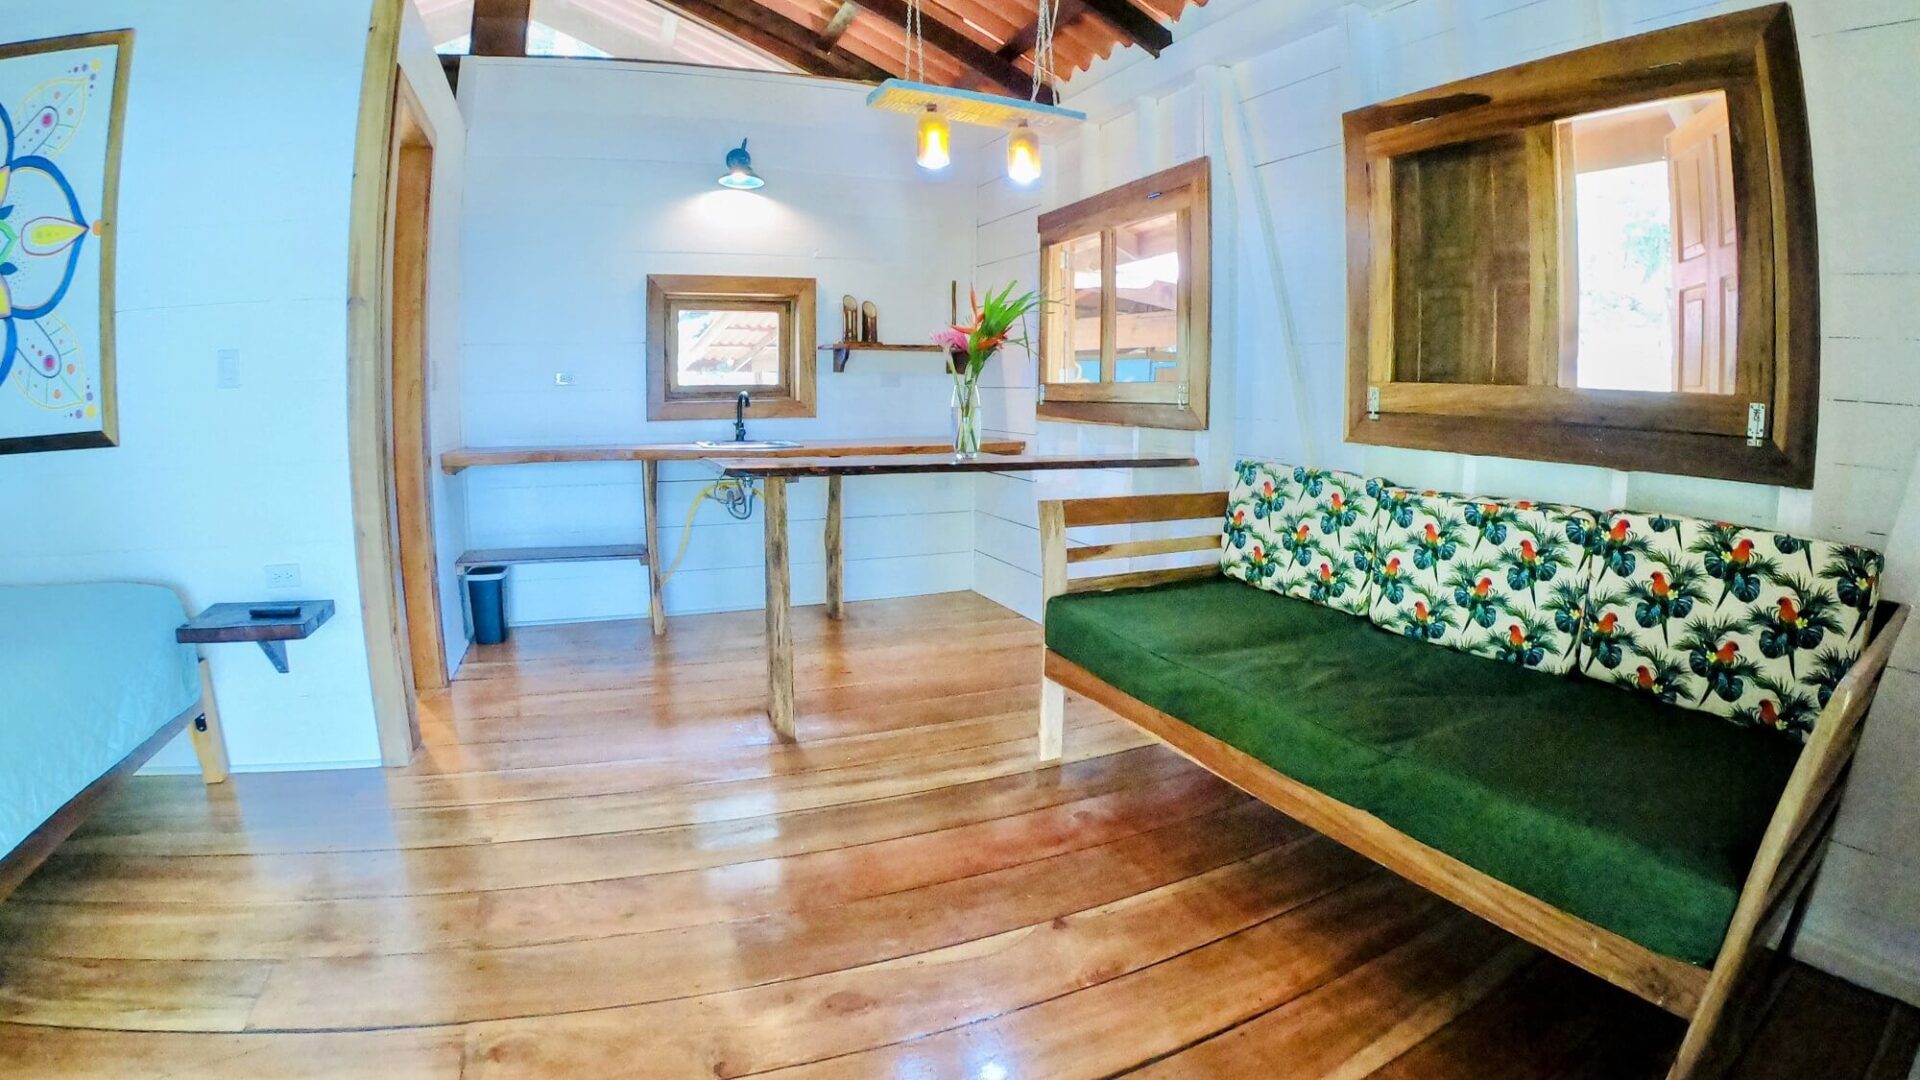 A room with wooden floors and green furniture.